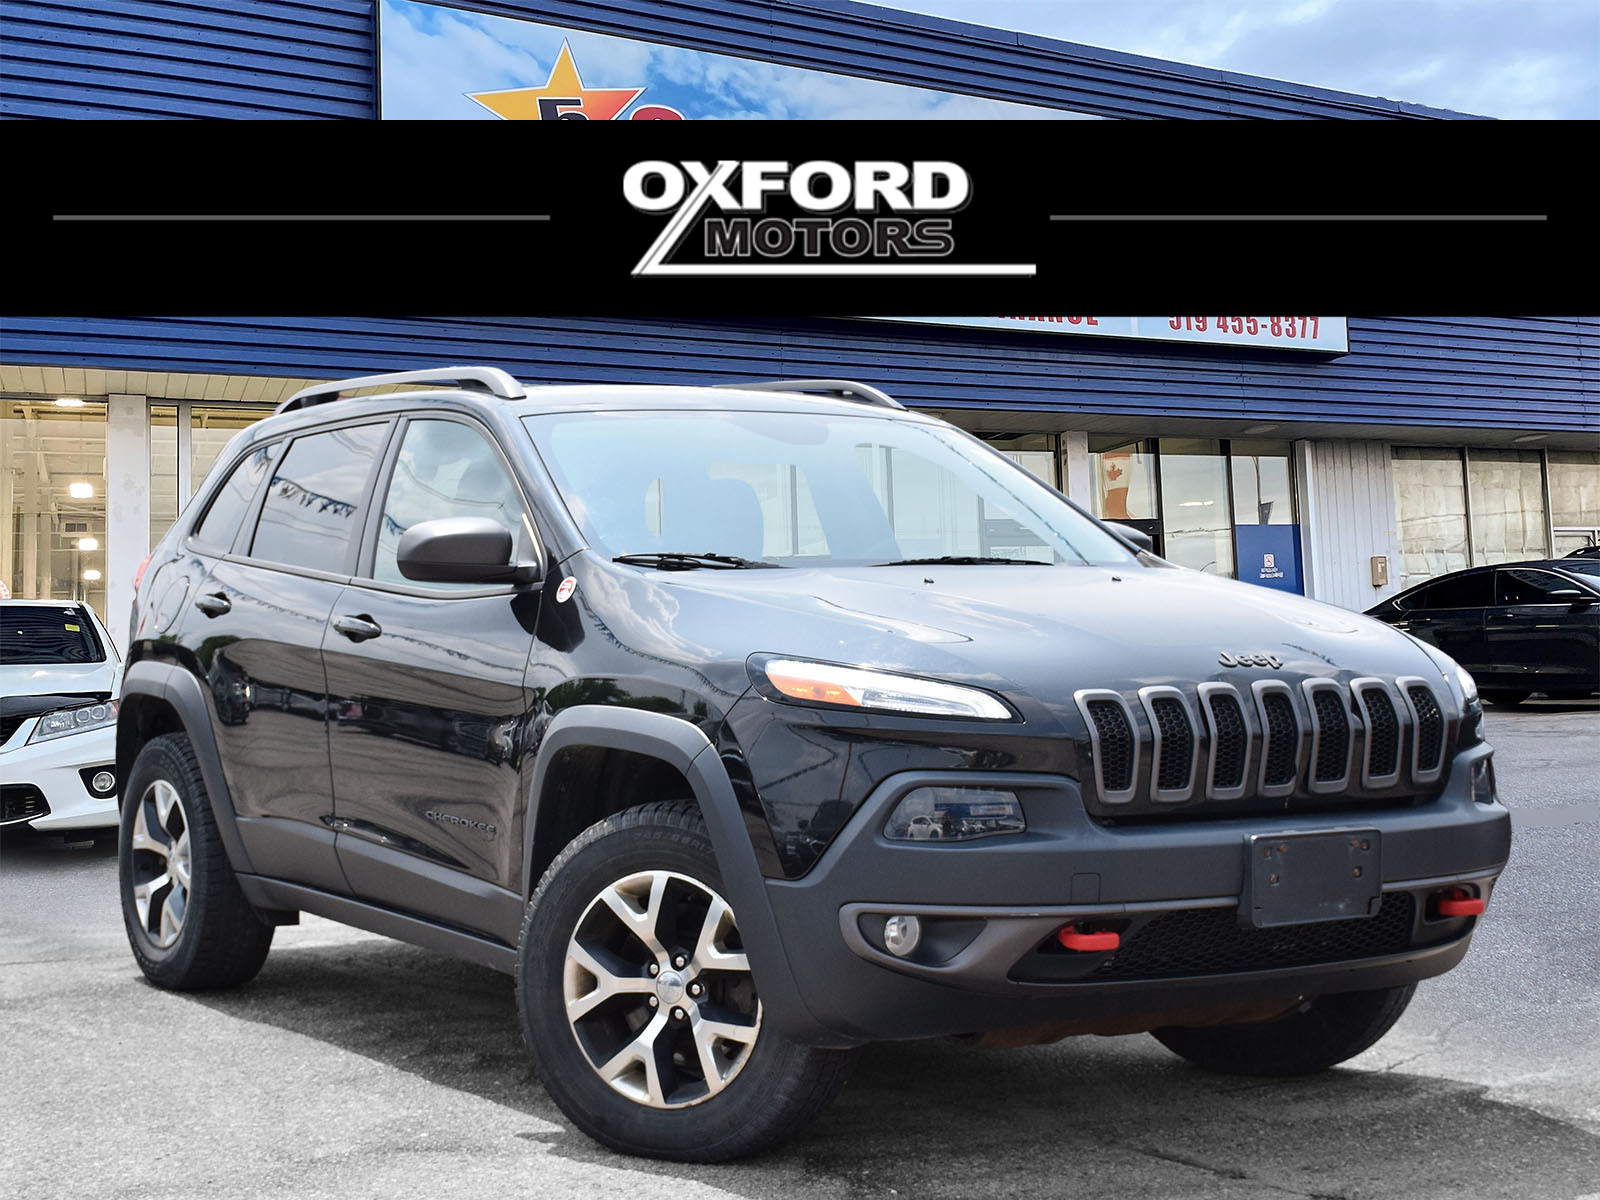 2016 Jeep Cherokee AWD LEATHER PANOROOF MINT! WE FINANCE ALL CREDIT